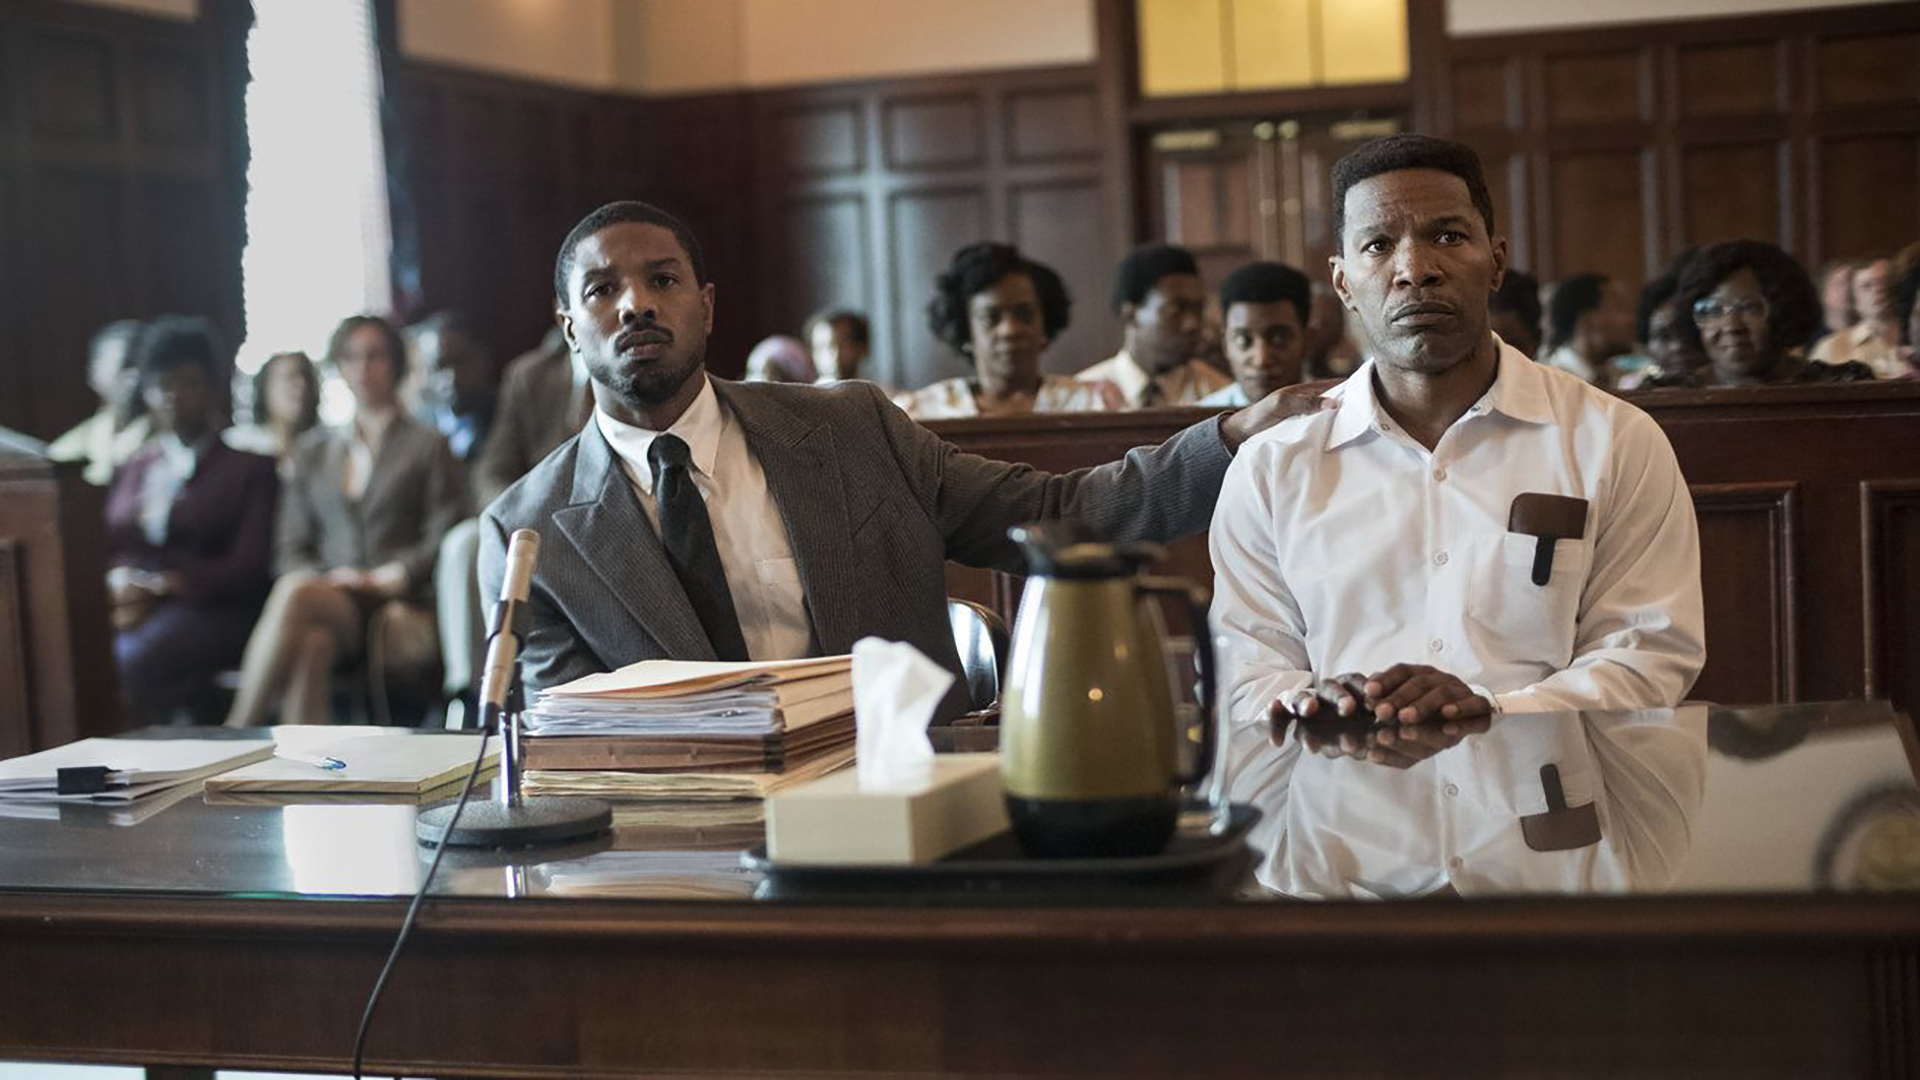 A courtroom scene from the film "Just Mercy."